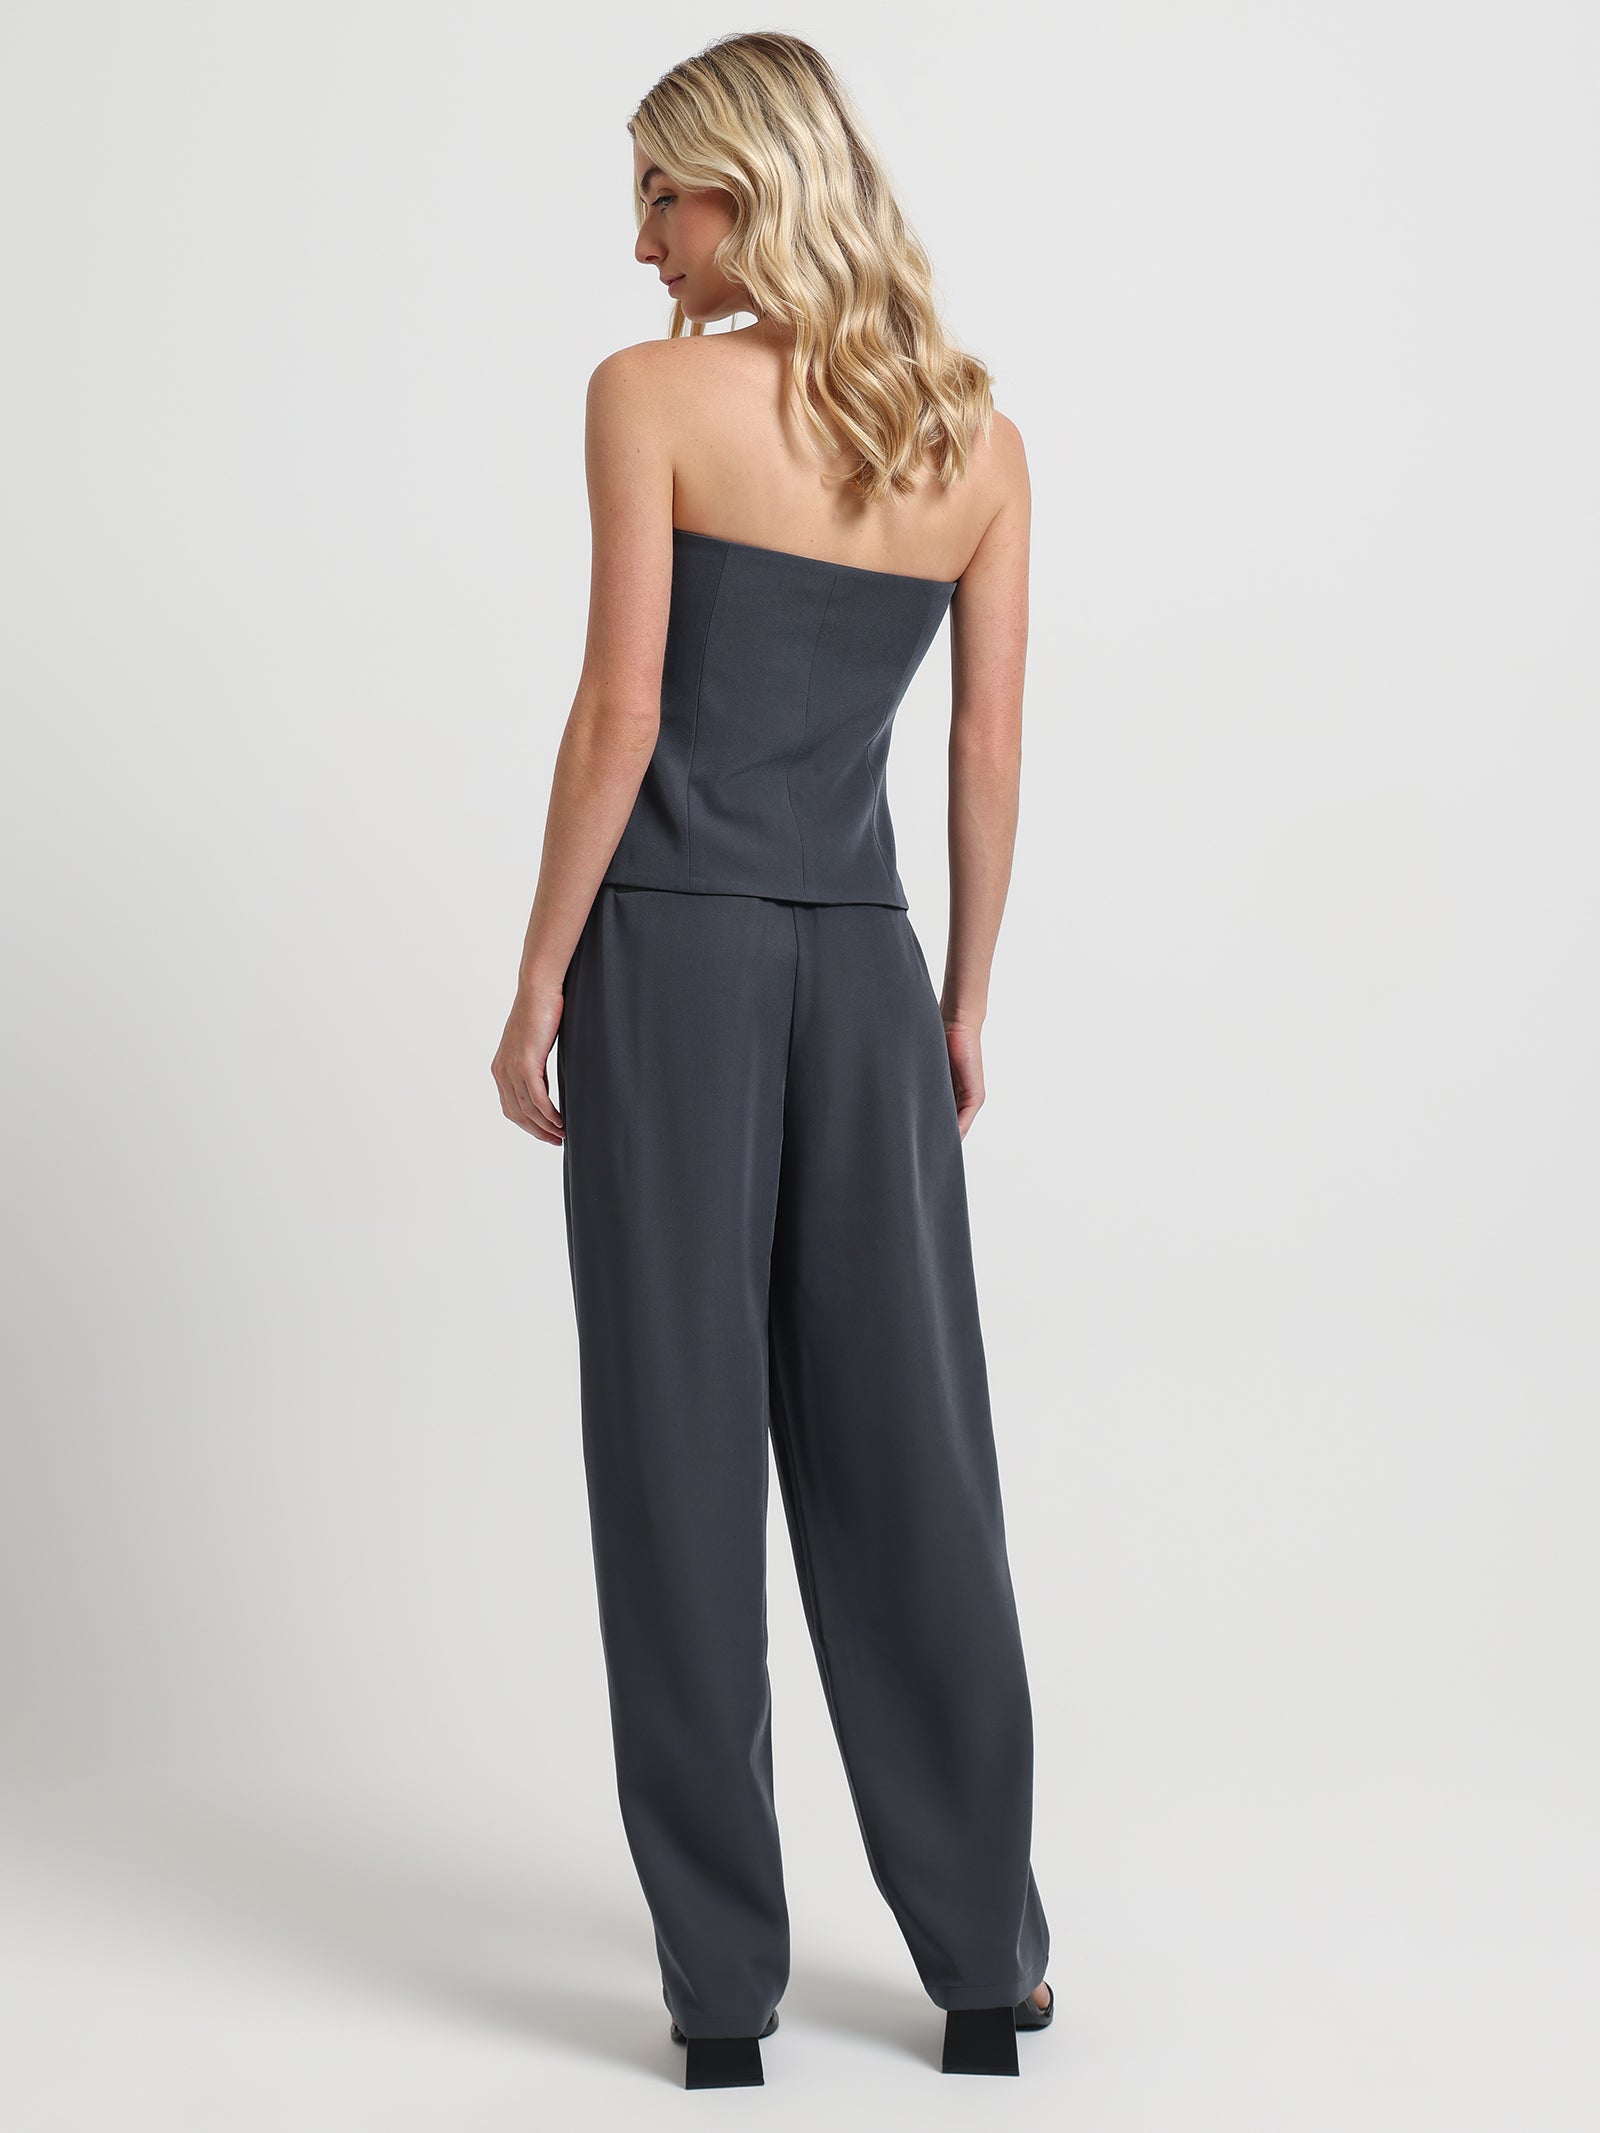 Hart Tailored Pants in Ash